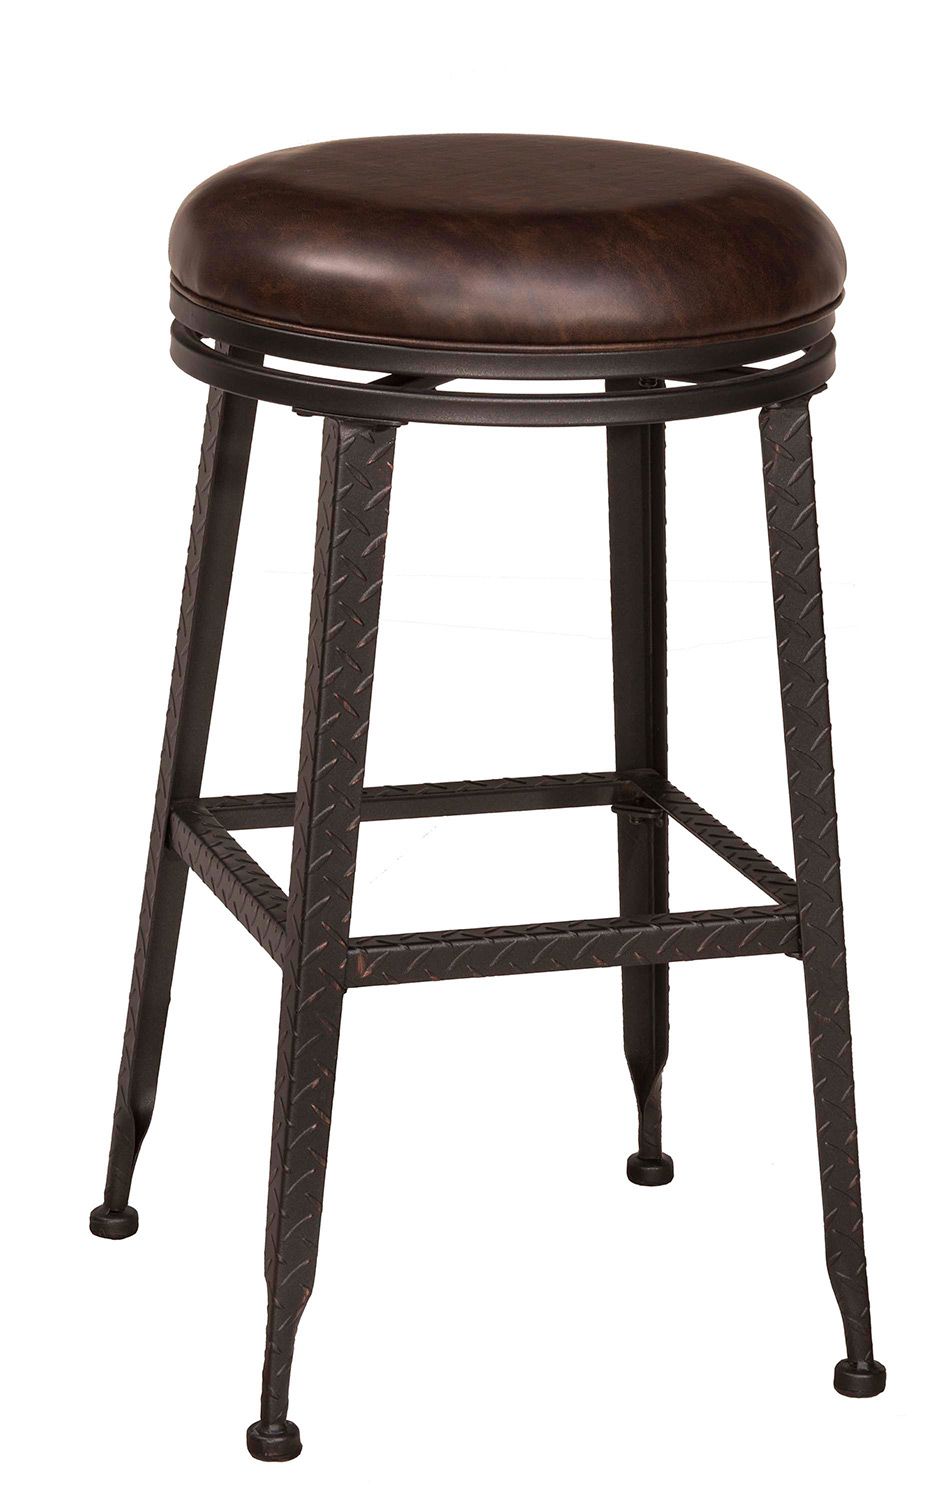 Hillsdale Hale Backless Swivel Counter Stool - Black/Copper Highlight